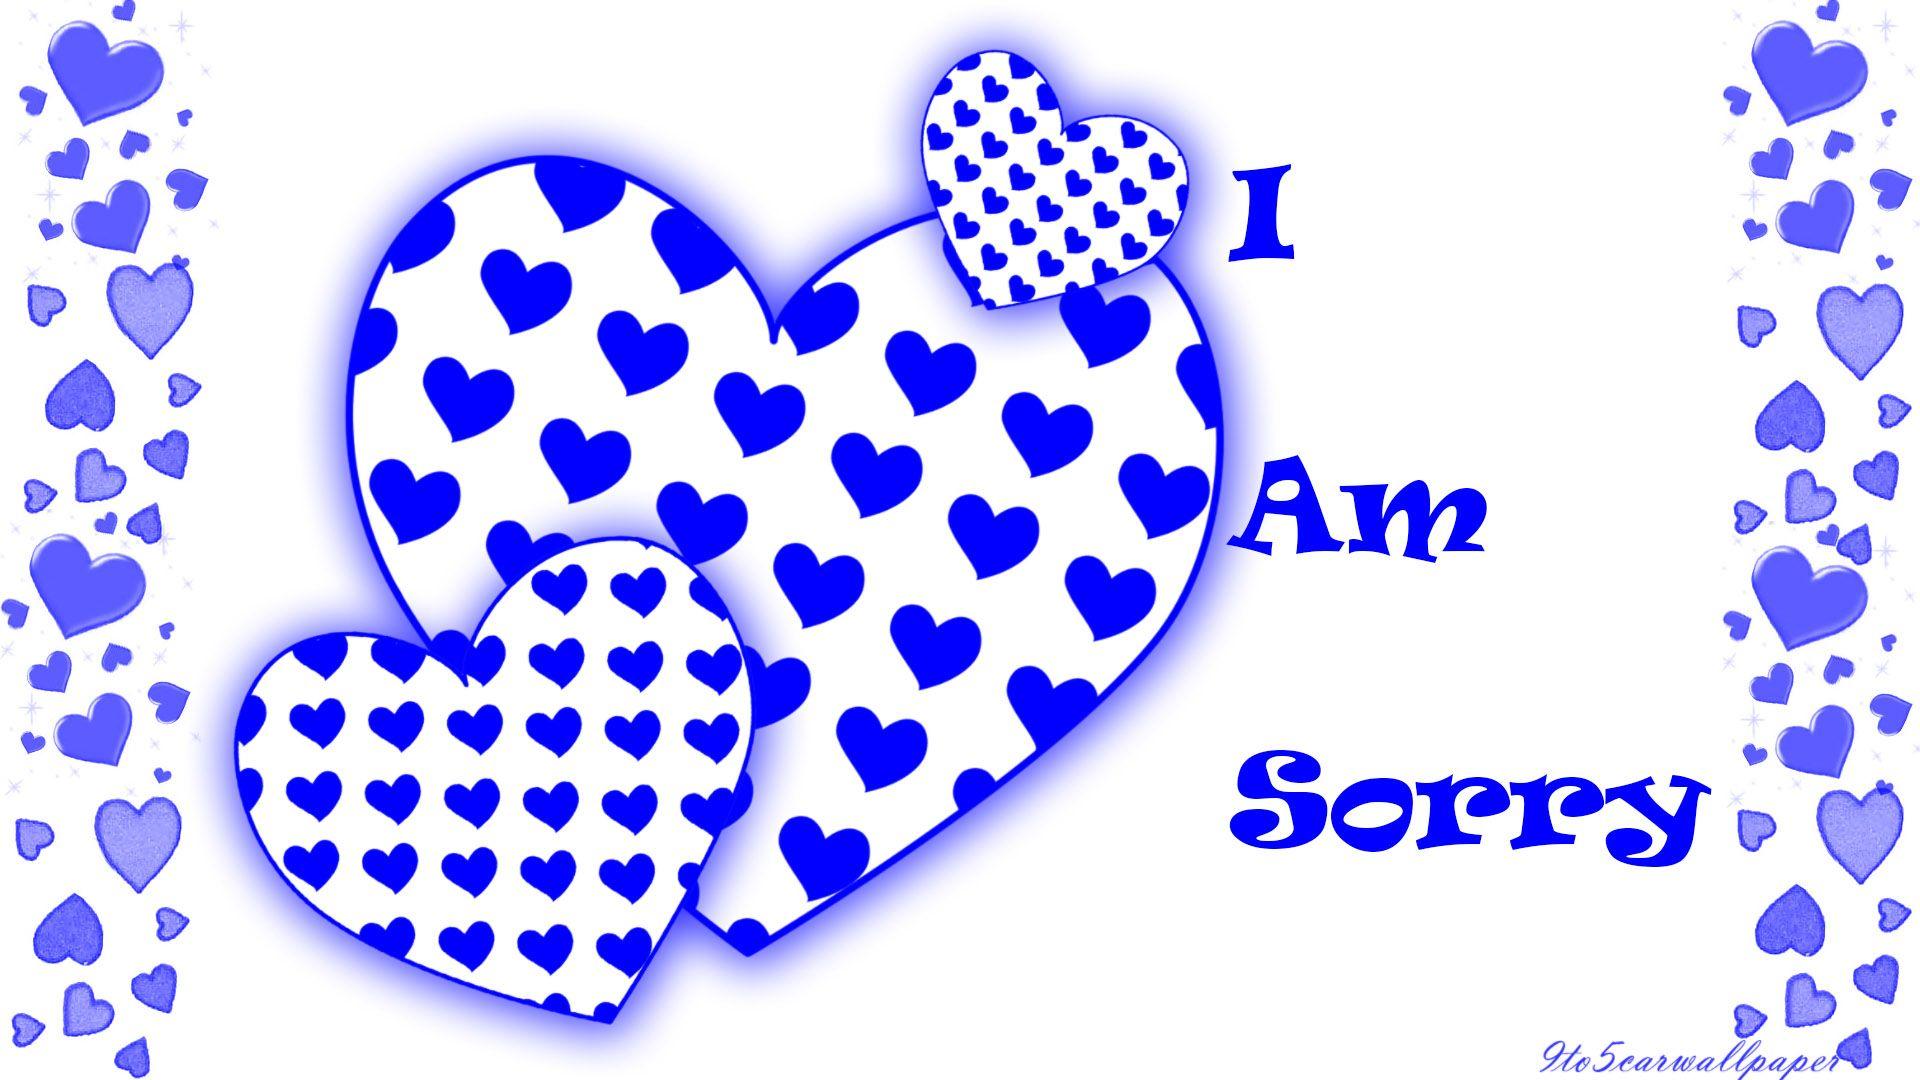 Latest I Am Sorry Image, Quotes & HD Wallpaper